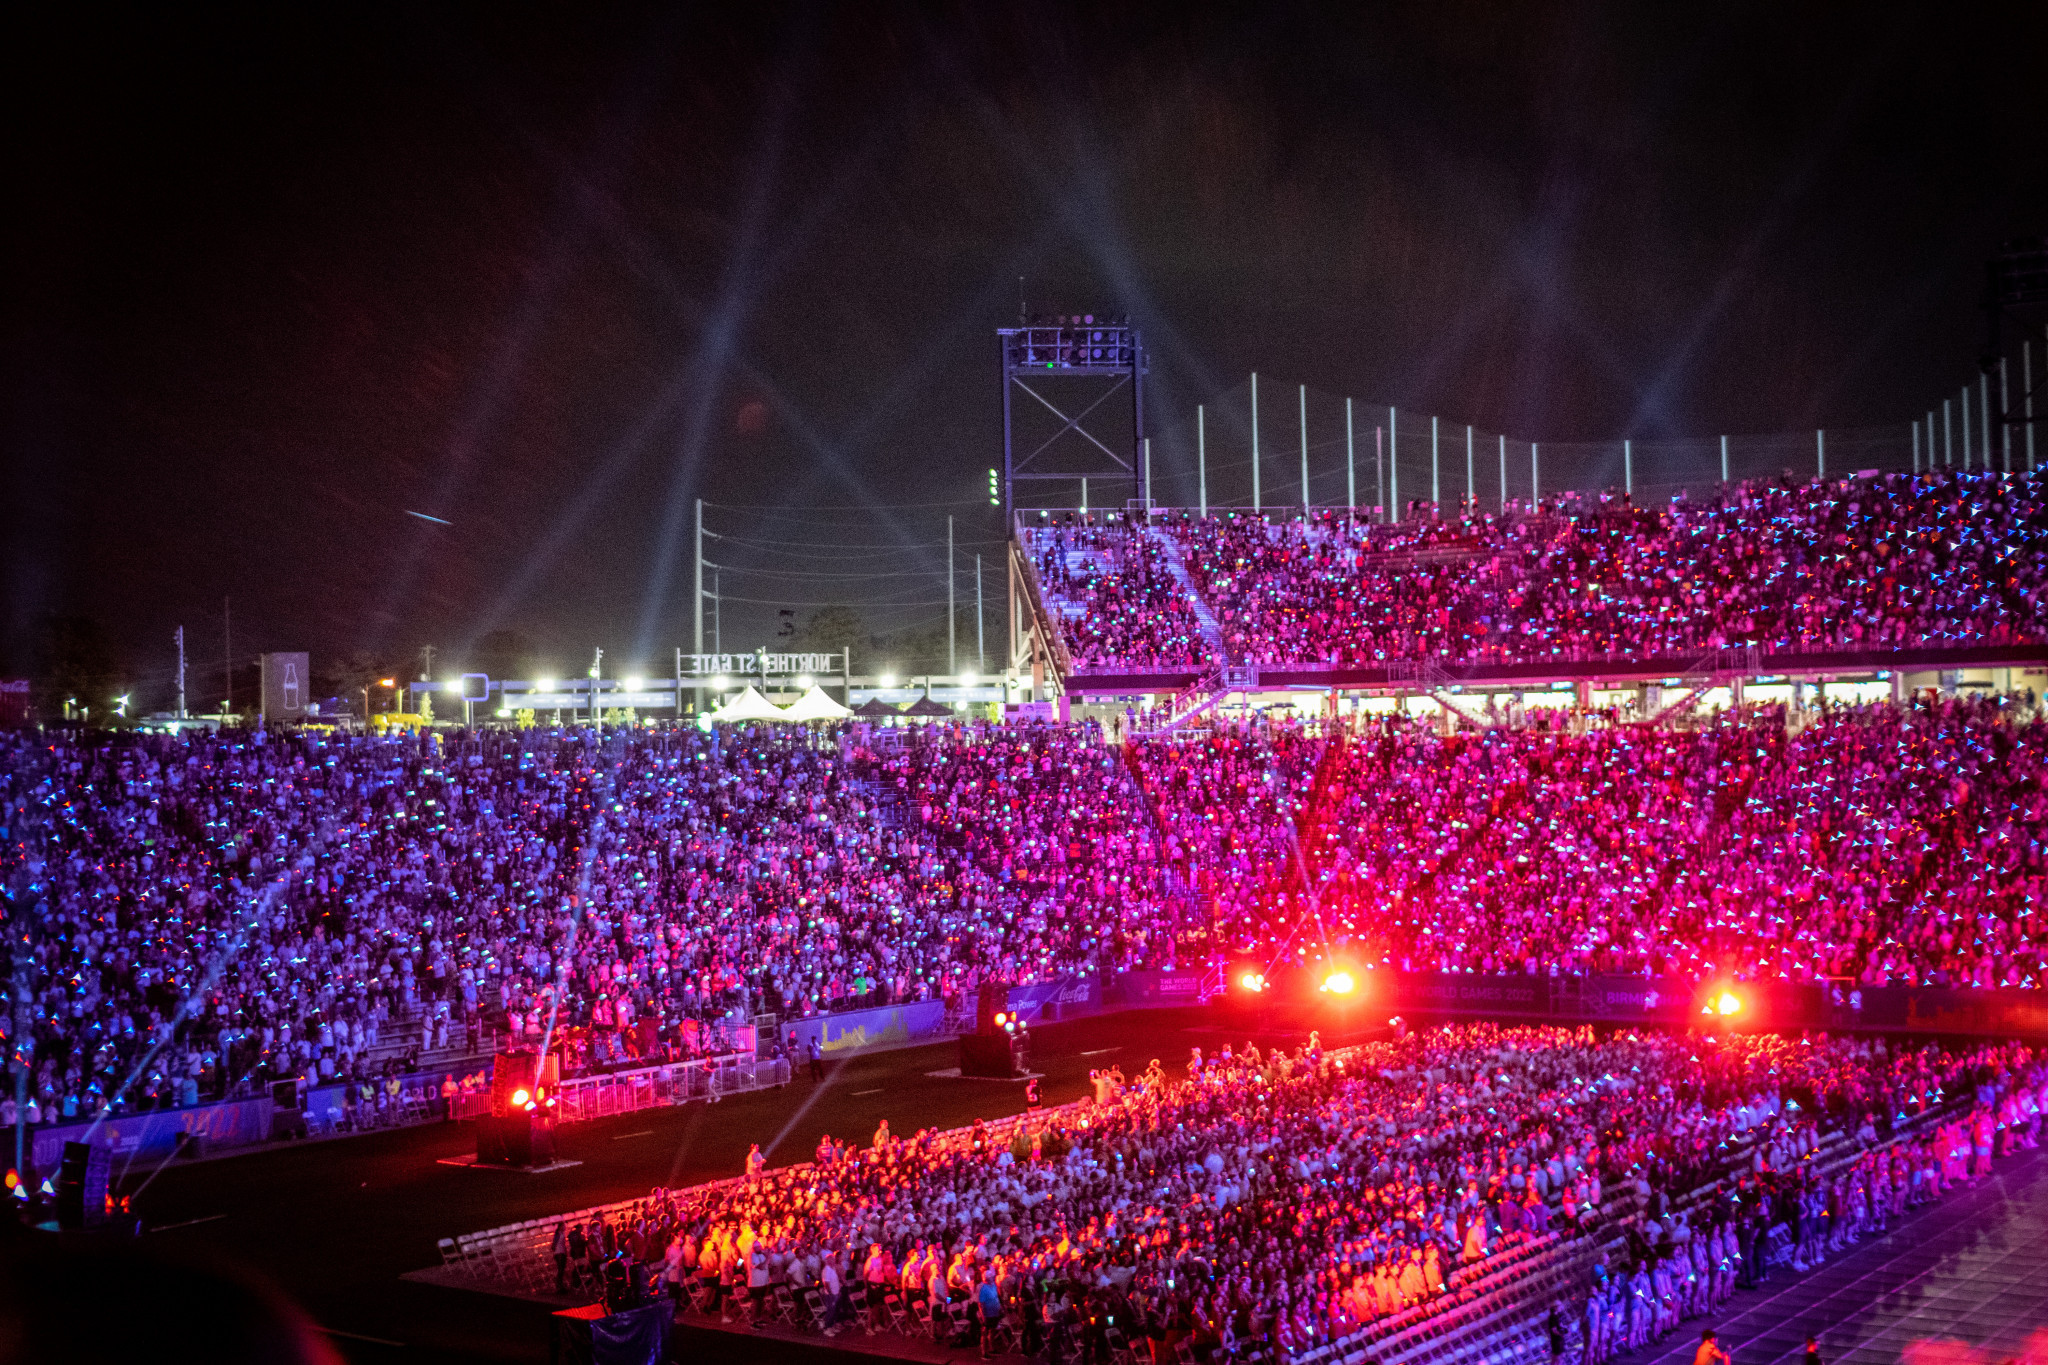 A total of 140,217 ticketed spectators attended events at the Birmingham 2022 World Games ©The World Games